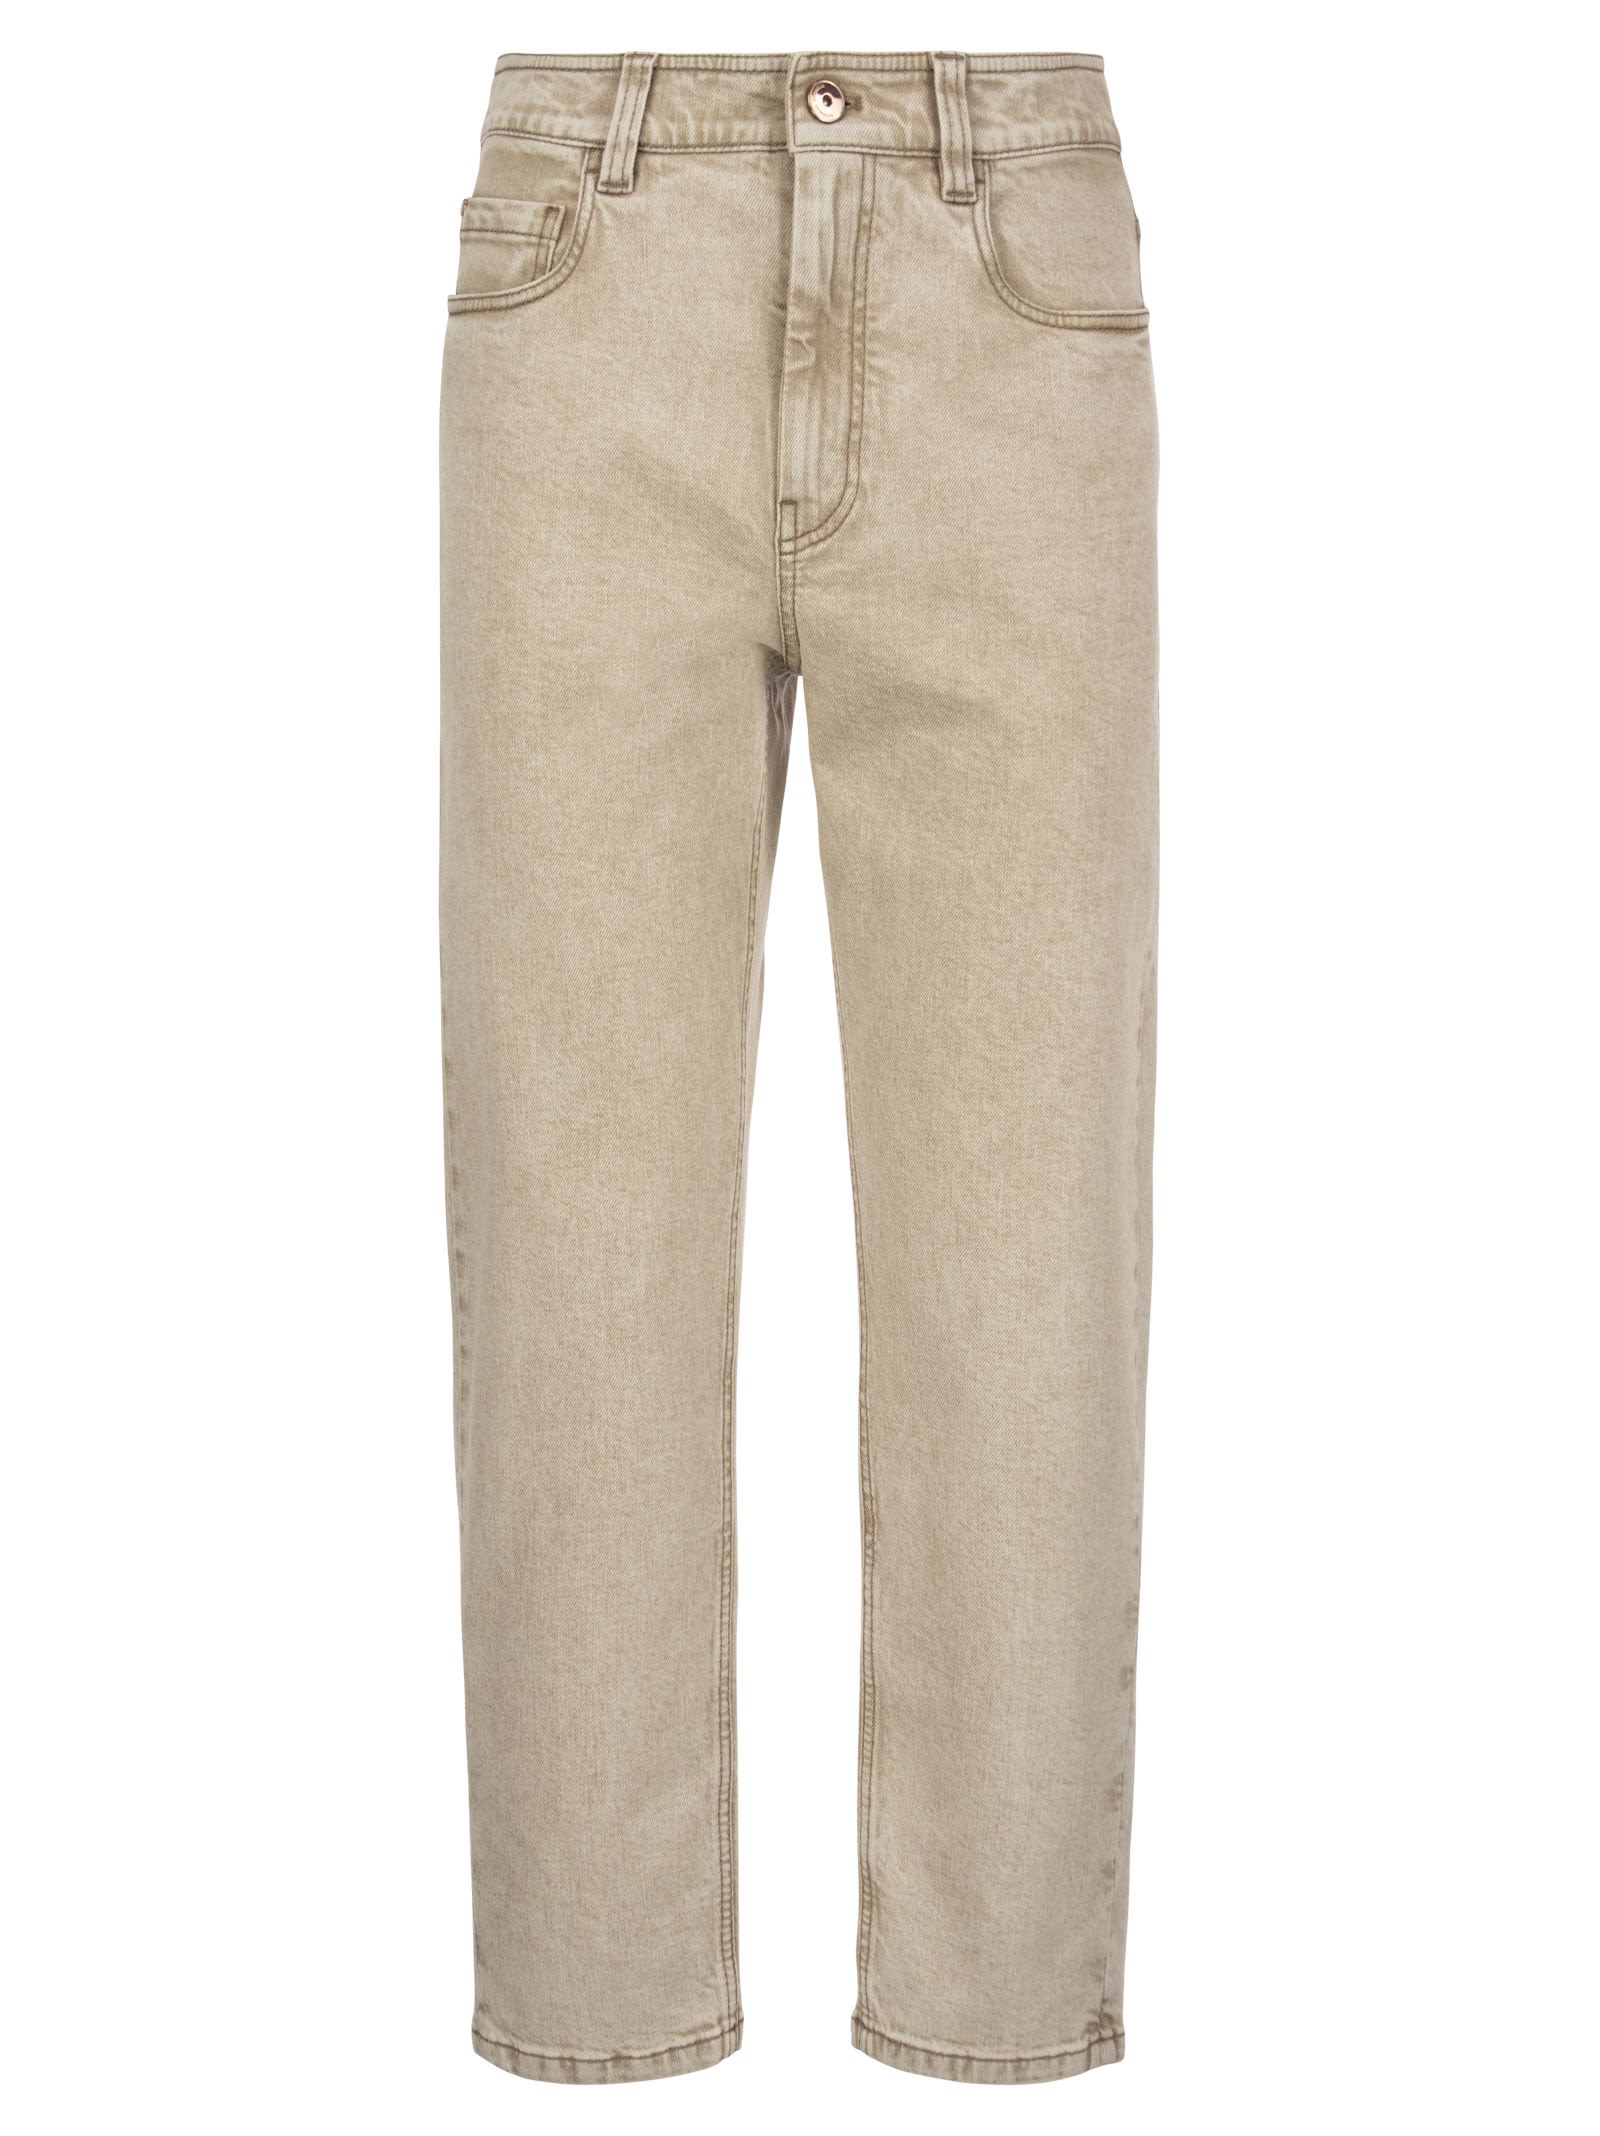 Brunello Cucinelli Baggy Trousers In Comfort Brown Denim With shiny Tab